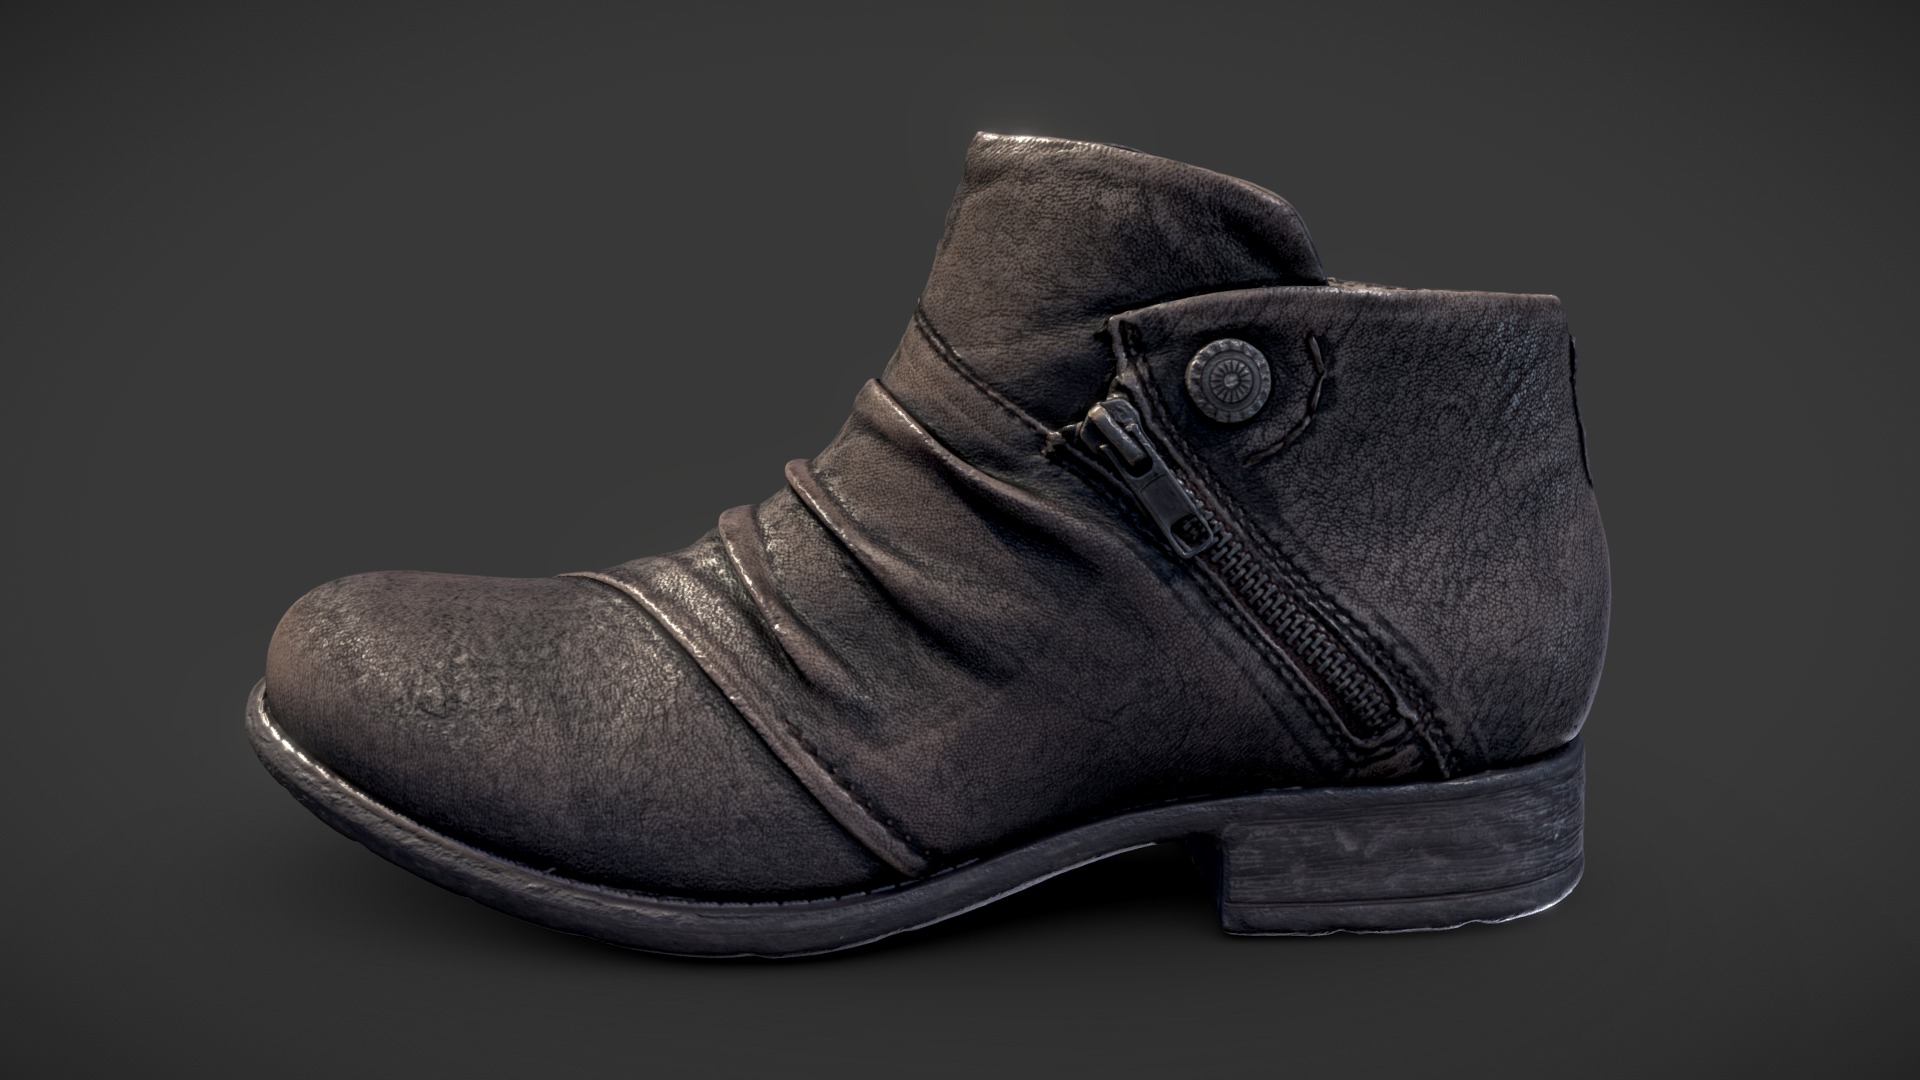 3D model Earth Ronan Taupe Boot (includes low poly model) - This is a 3D model of the Earth Ronan Taupe Boot (includes low poly model). The 3D model is about a black boot with a silver sole.